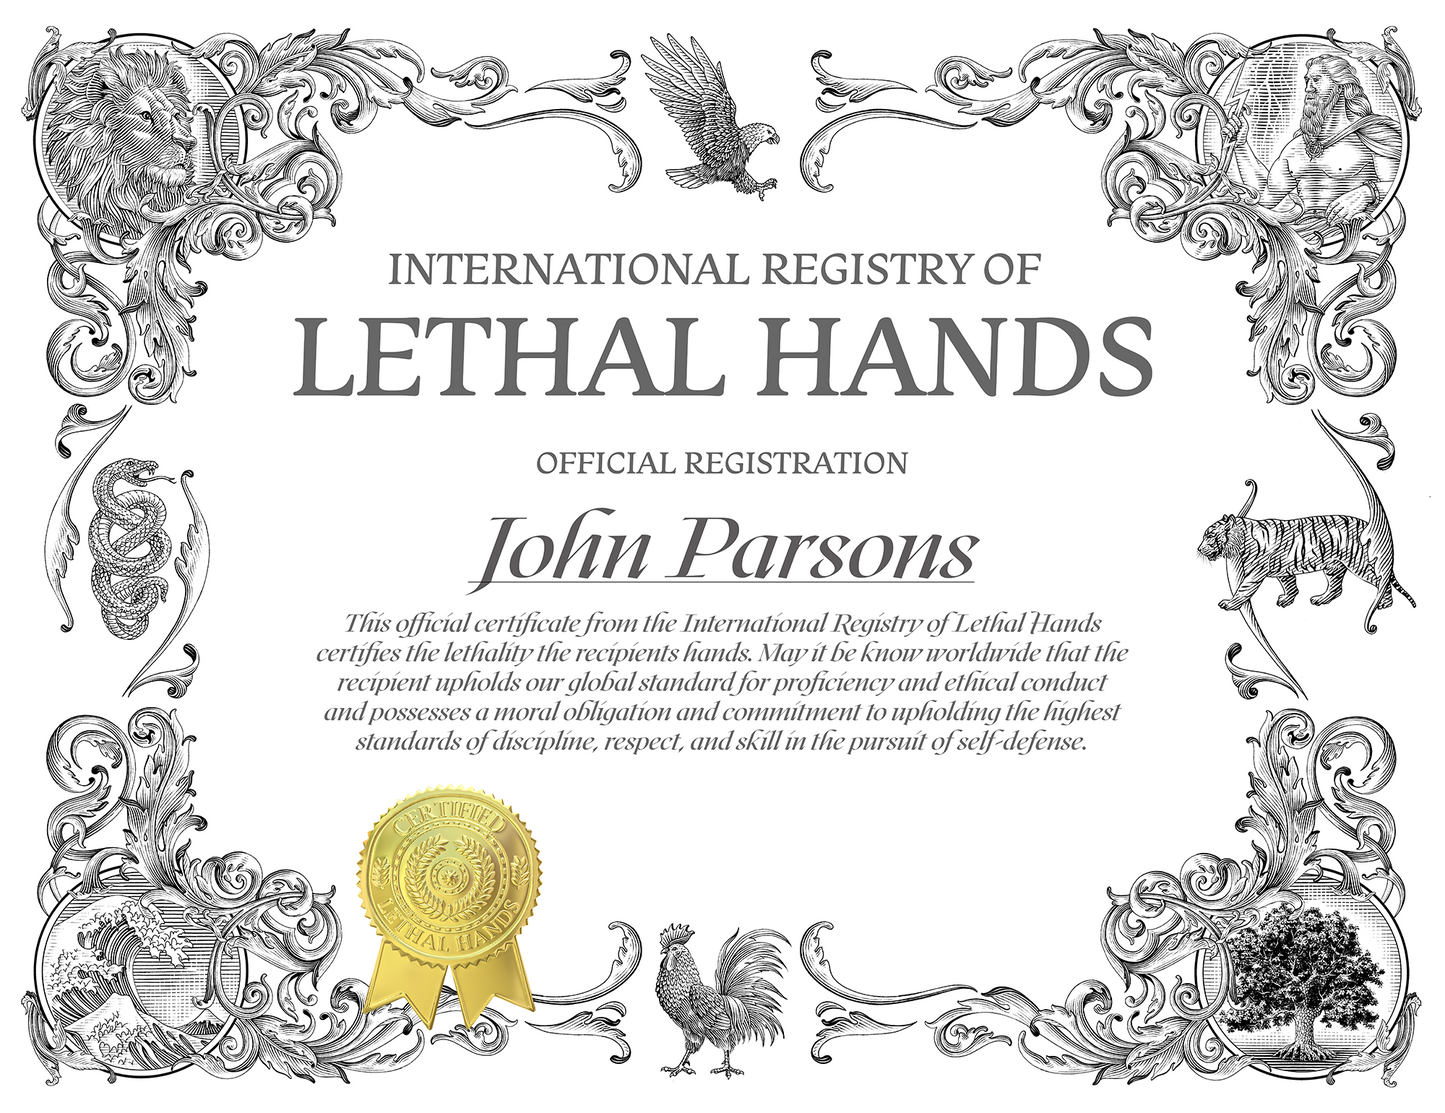 Official Certificate of Lethal Hands